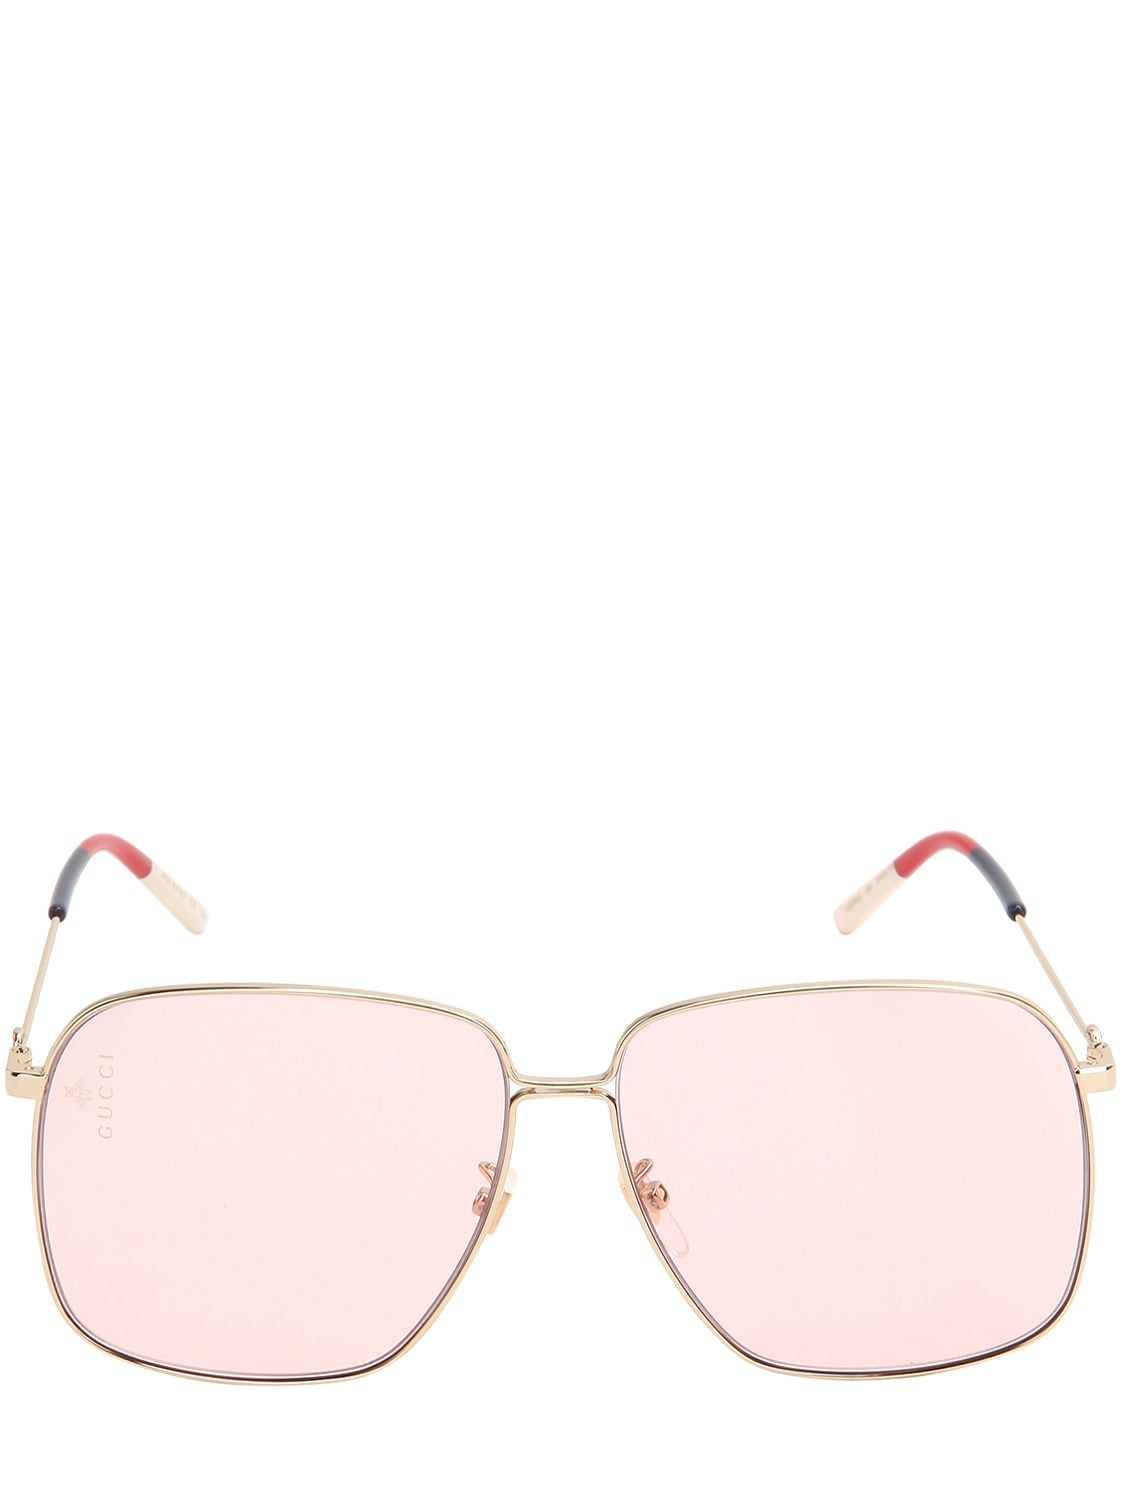 Gucci Large Round Sunglasses In Pink